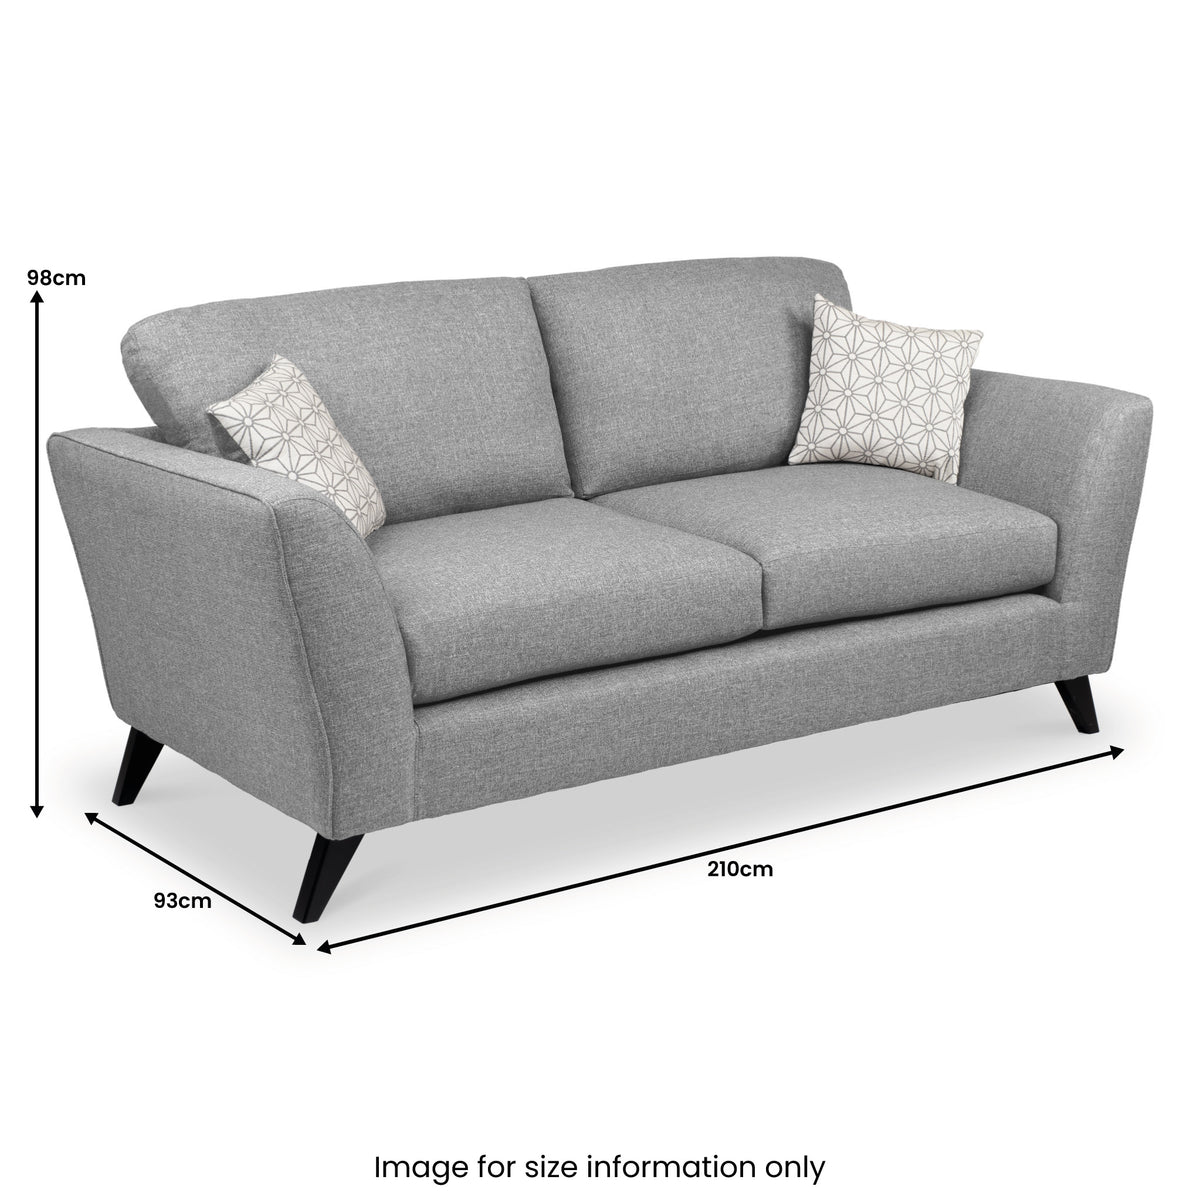 Geo 3 Seater Sofa in Charcoal by Roseland Furniture